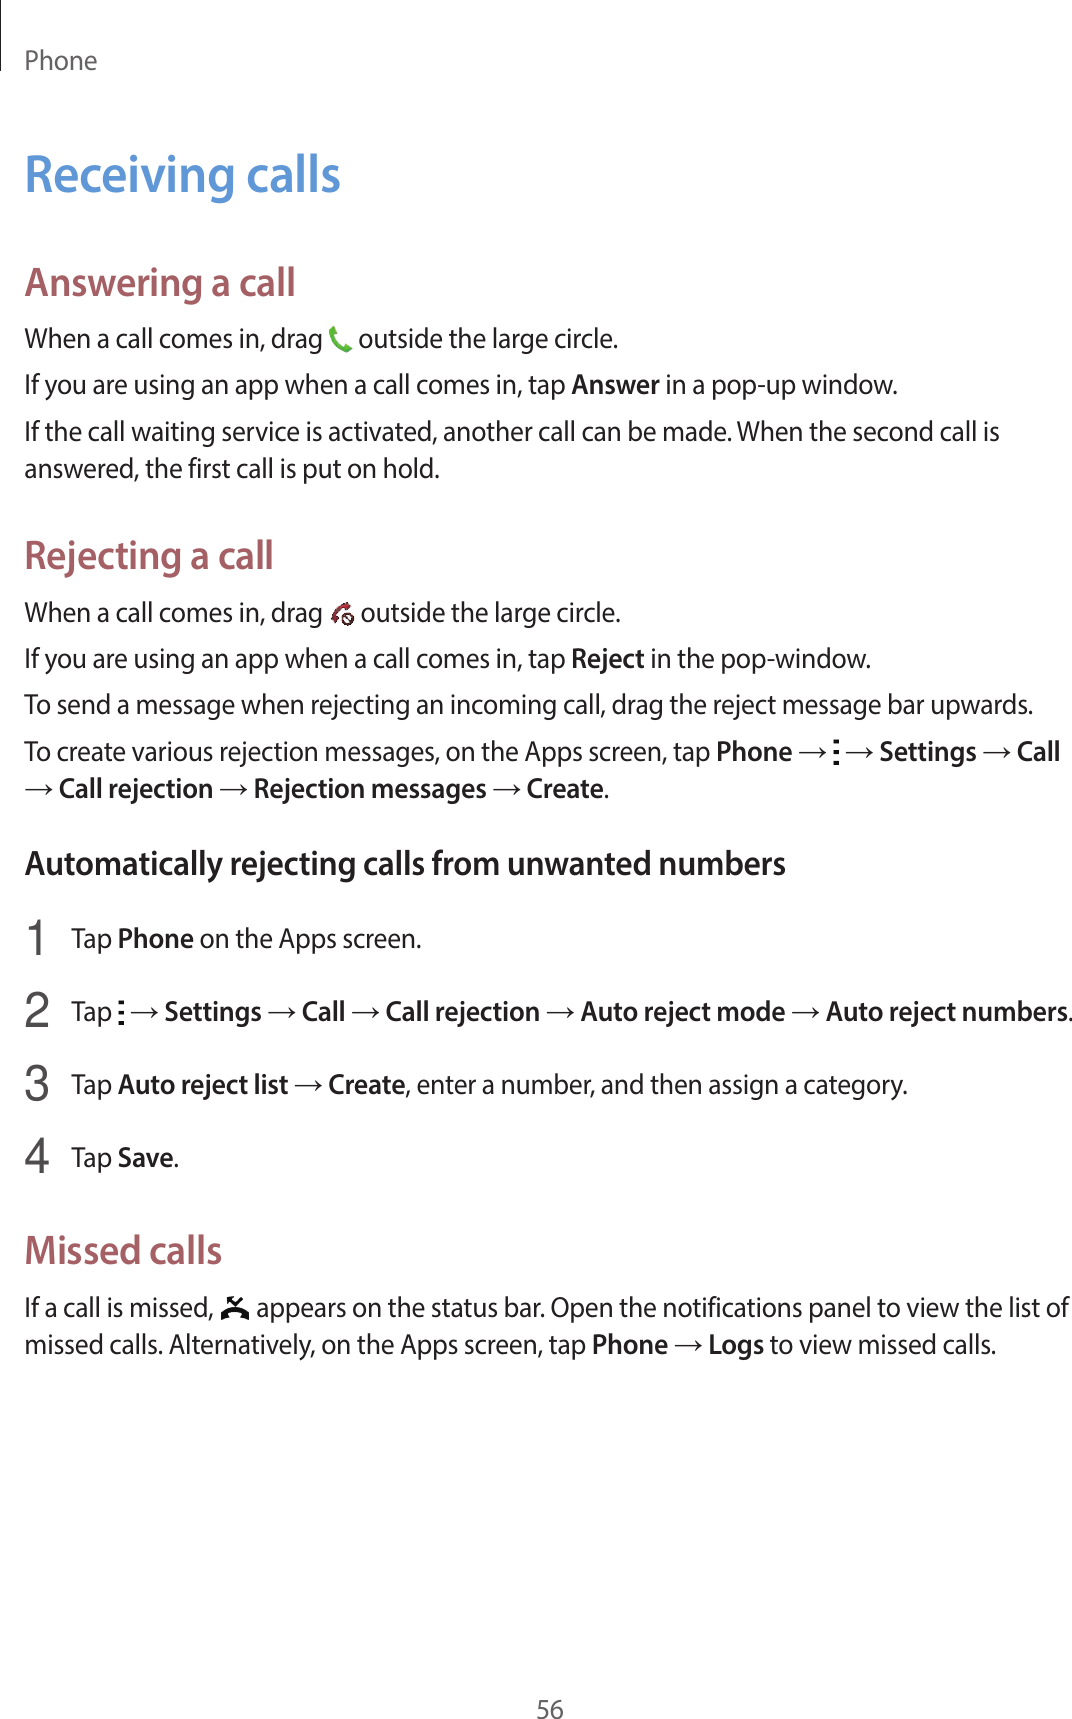 Phone56Receiving callsAnswering a callWhen a call comes in, drag   outside the large circle.If you are using an app when a call comes in, tap Answer in a pop-up window.If the call waiting service is activated, another call can be made. When the second call is answered, the first call is put on hold.Rejecting a callWhen a call comes in, drag   outside the large circle.If you are using an app when a call comes in, tap Reject in the pop-window.To send a message when rejecting an incoming call, drag the reject message bar upwards.To create various rejection messages, on the Apps screen, tap Phone →   → Settings → Call → Call rejection → Rejection messages → Create.Automatically rejecting calls from unwanted numbers1  Tap Phone on the Apps screen.2  Tap   → Settings → Call → Call rejection → Auto reject mode → Auto reject numbers.3  Tap Auto reject list → Create, enter a number, and then assign a category.4  Tap Save.Missed callsIf a call is missed,   appears on the status bar. Open the notifications panel to view the list of missed calls. Alternatively, on the Apps screen, tap Phone → Logs to view missed calls.